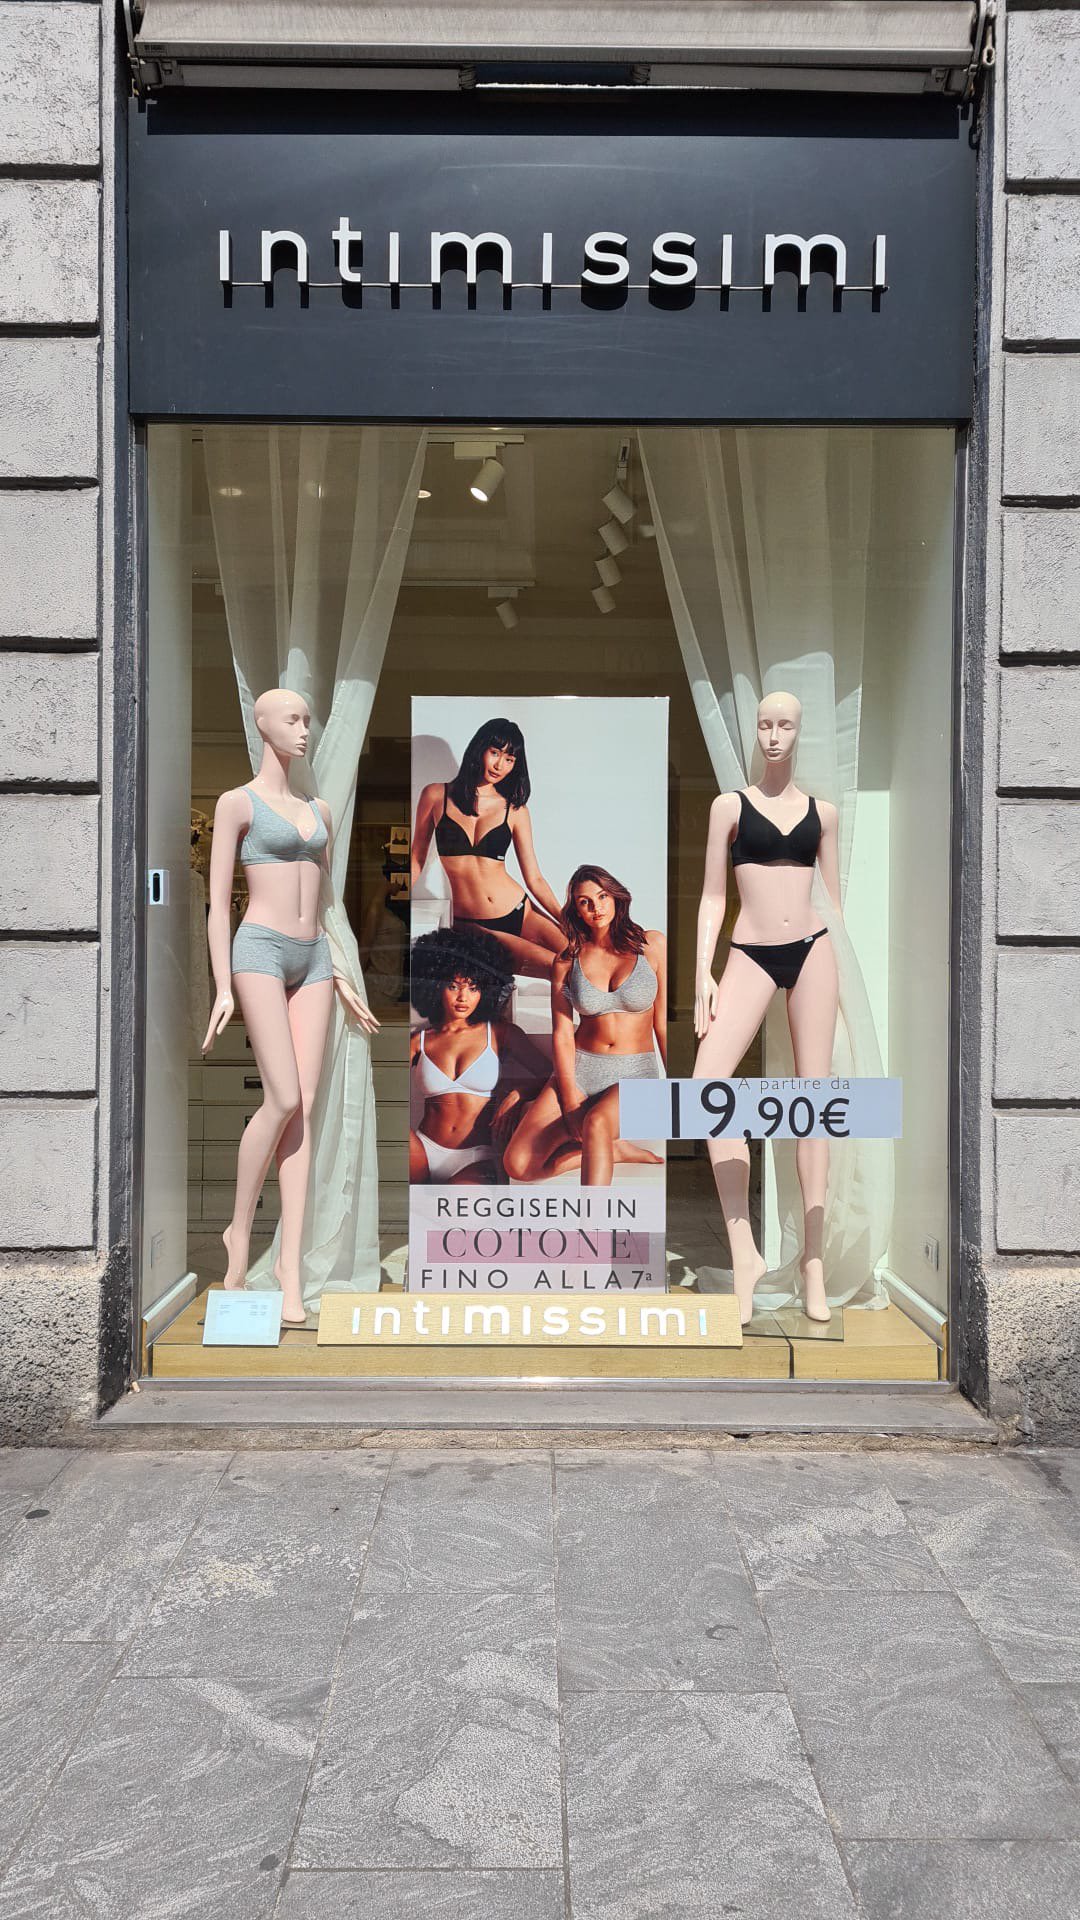 https://www.intimissimi.com/on/demandware.static/-/Library-Sites-IntimissimiContentLibrary/default/dw9540baa1/storeImages/INT_8502_001.jpg